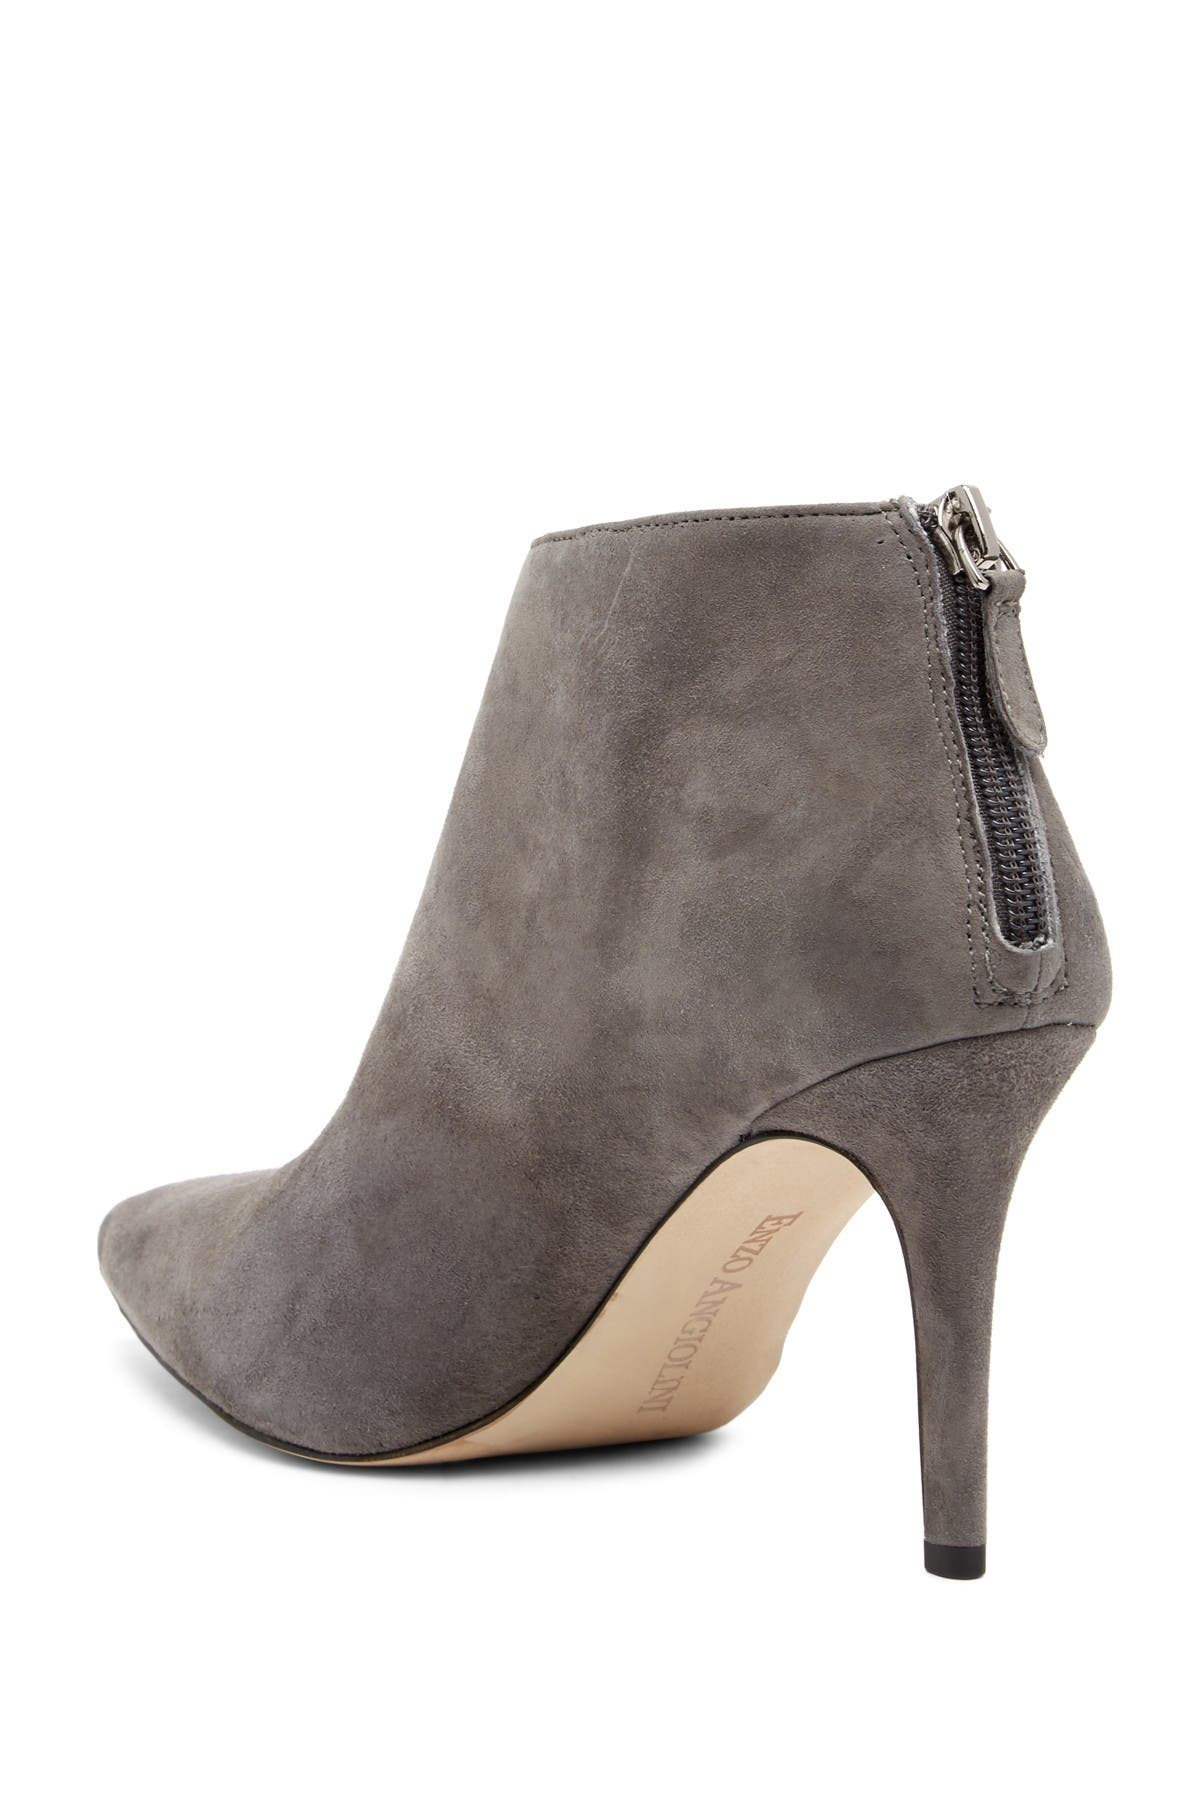 Enzo Angiolini | Ruthely Suede Bootie 